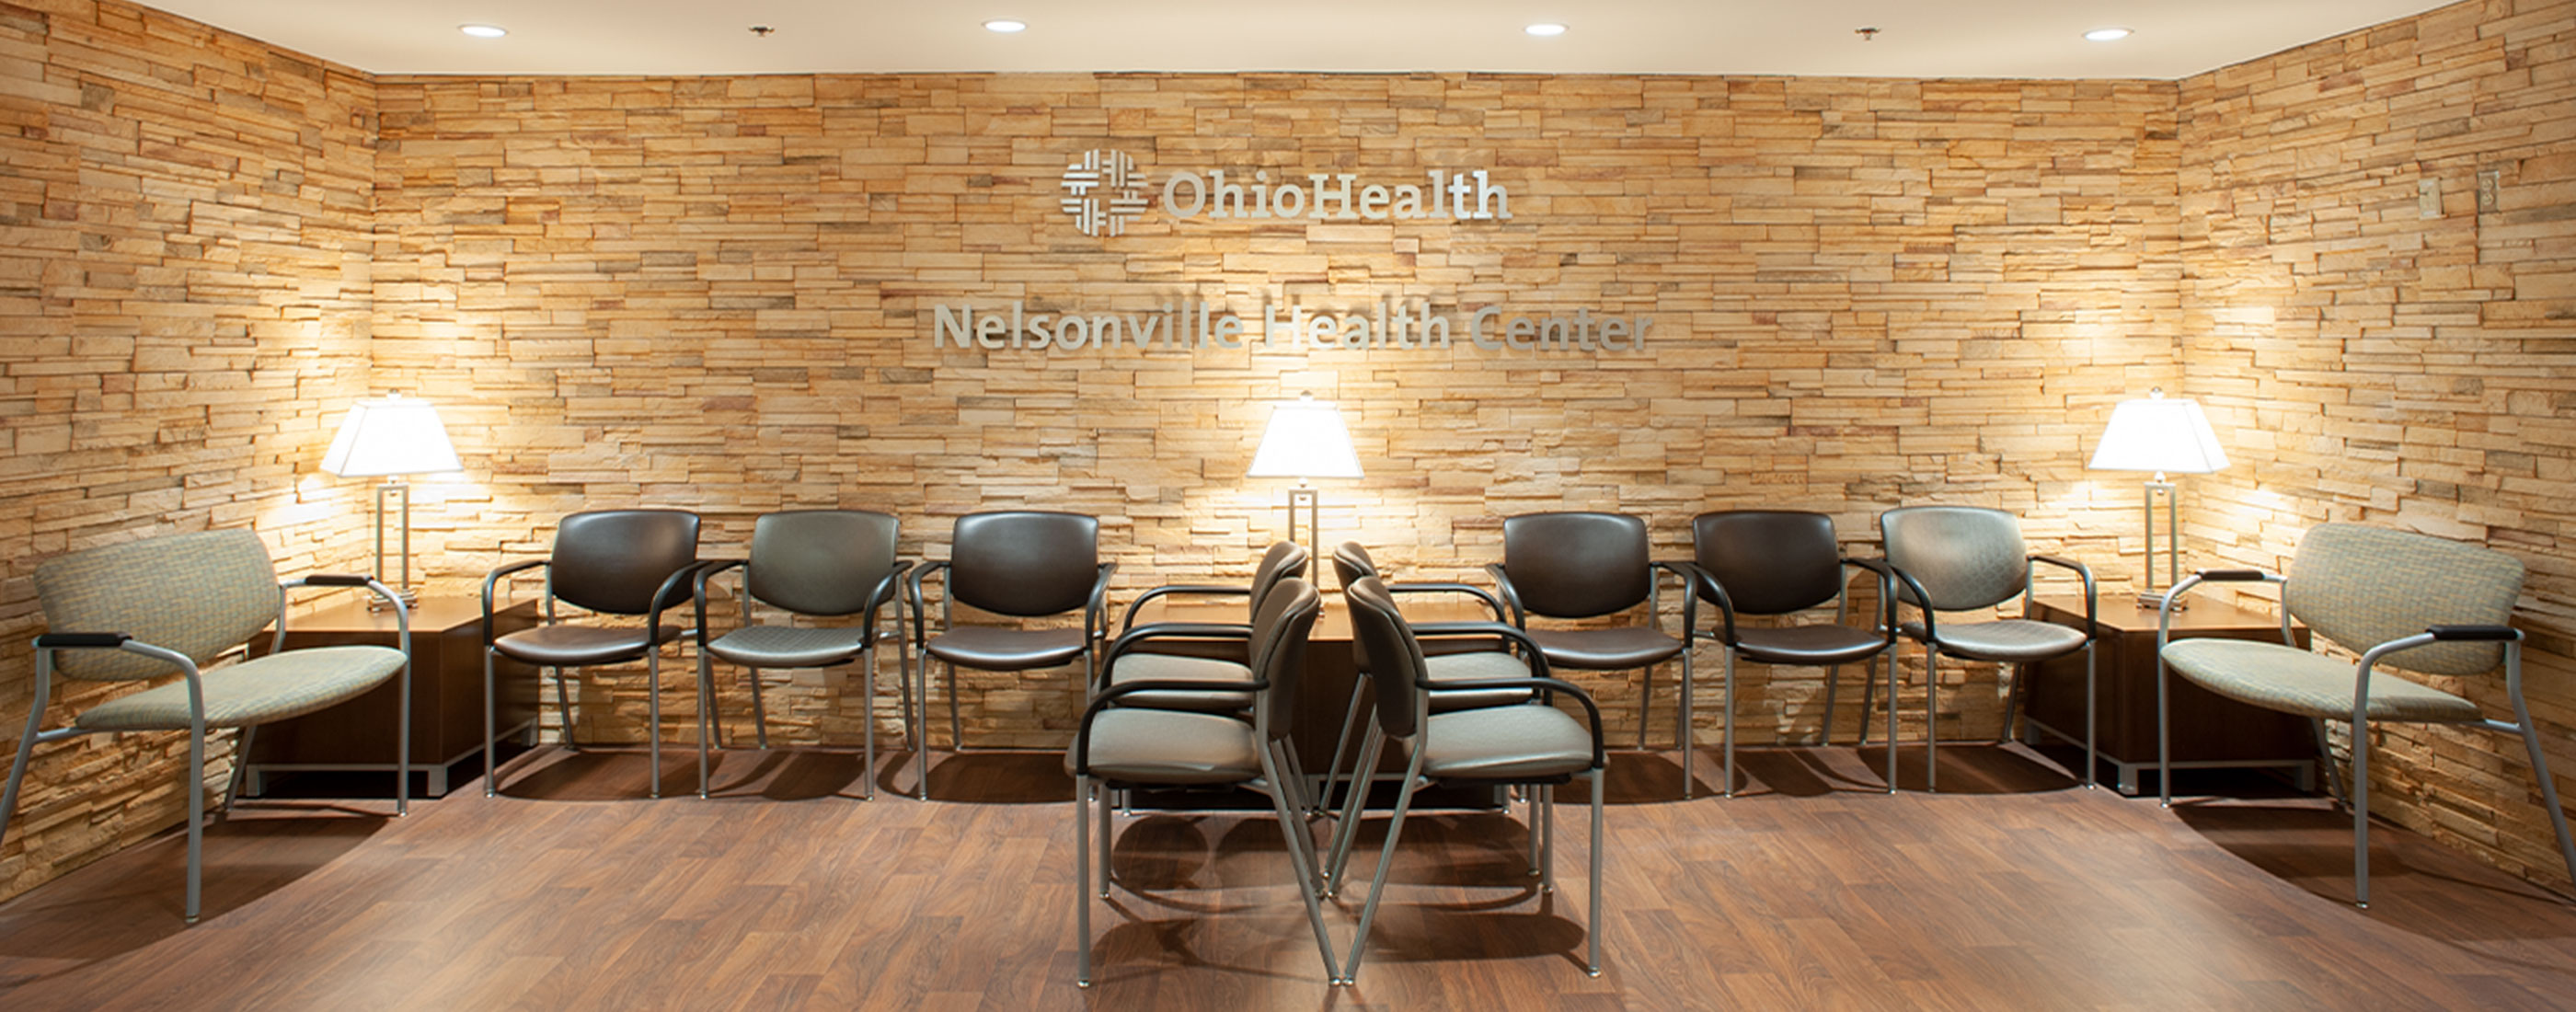 The OhioHealth Nelsonville Health Center was designed with local Star Brick.